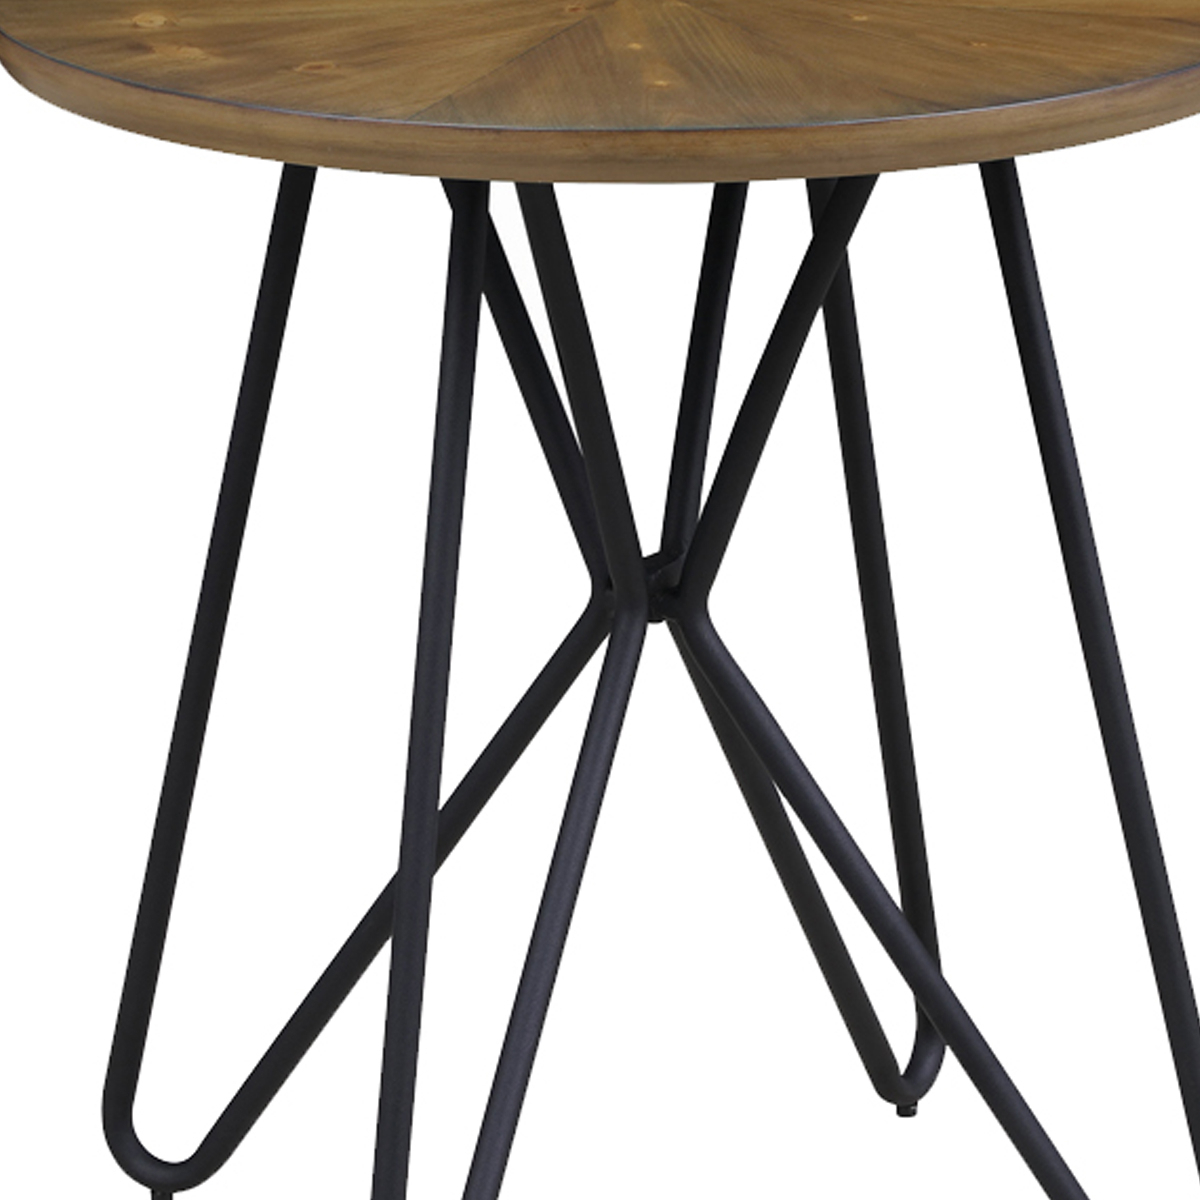 Dual Tone Round Wooden End Table With Metal Hairpin Legs, Brown And Black- Saltoro Sherpi